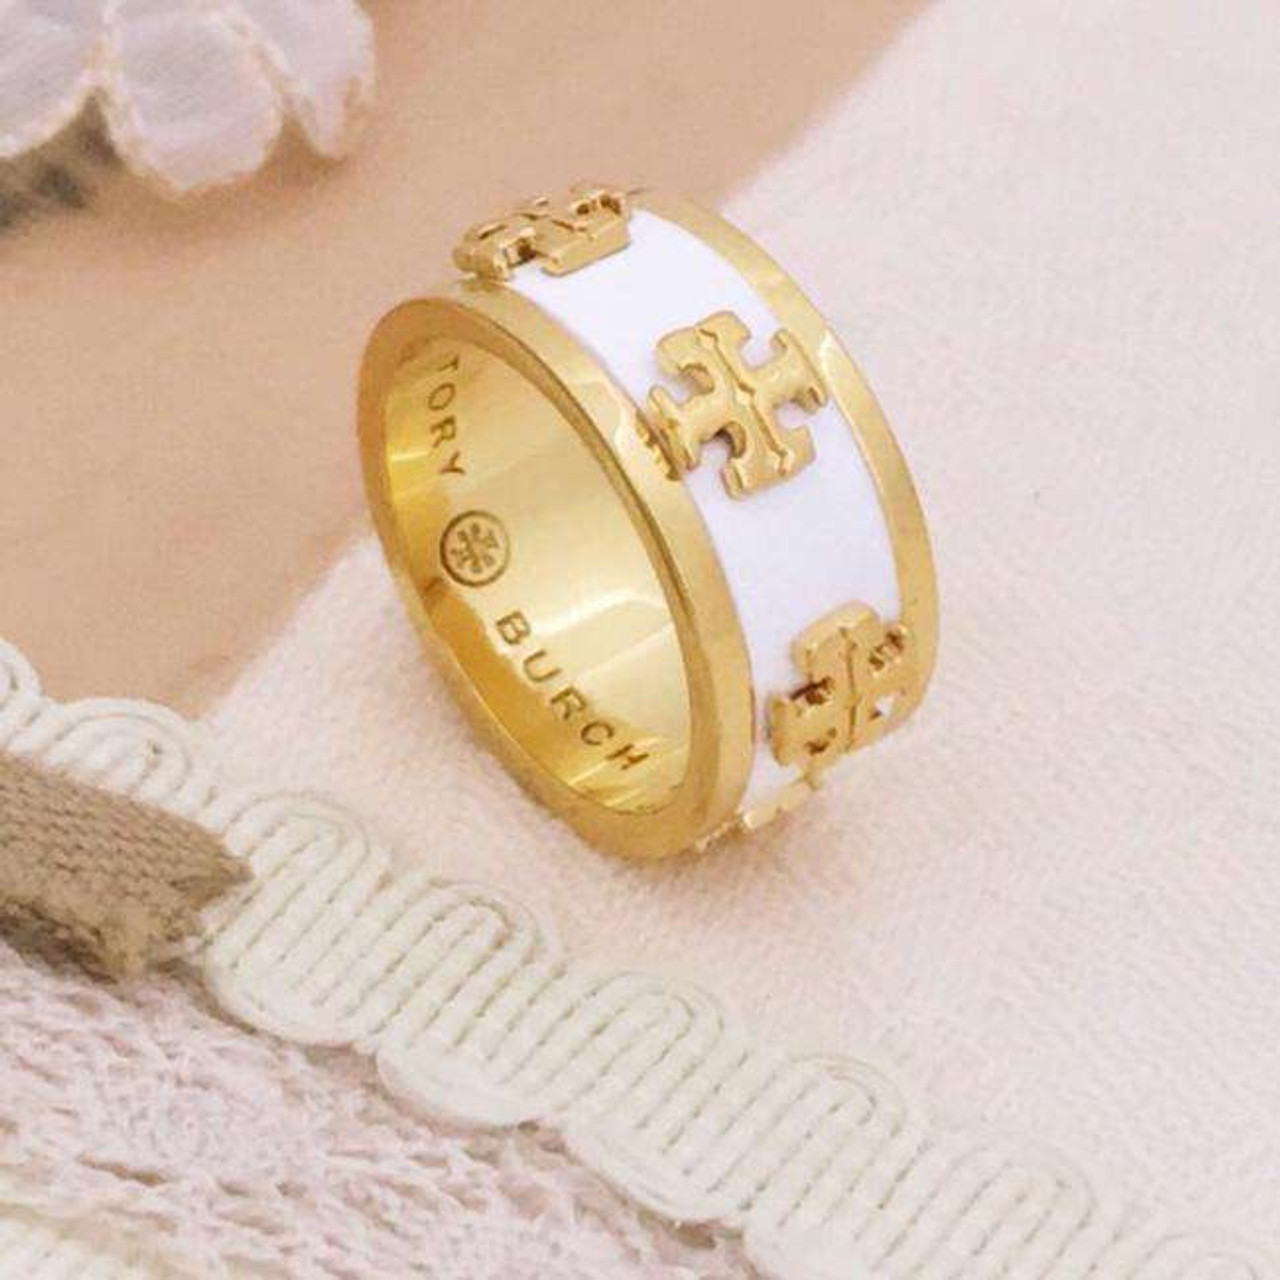 Tory Burch White and Gold Enameled Raised Logo Ring - Size 7 